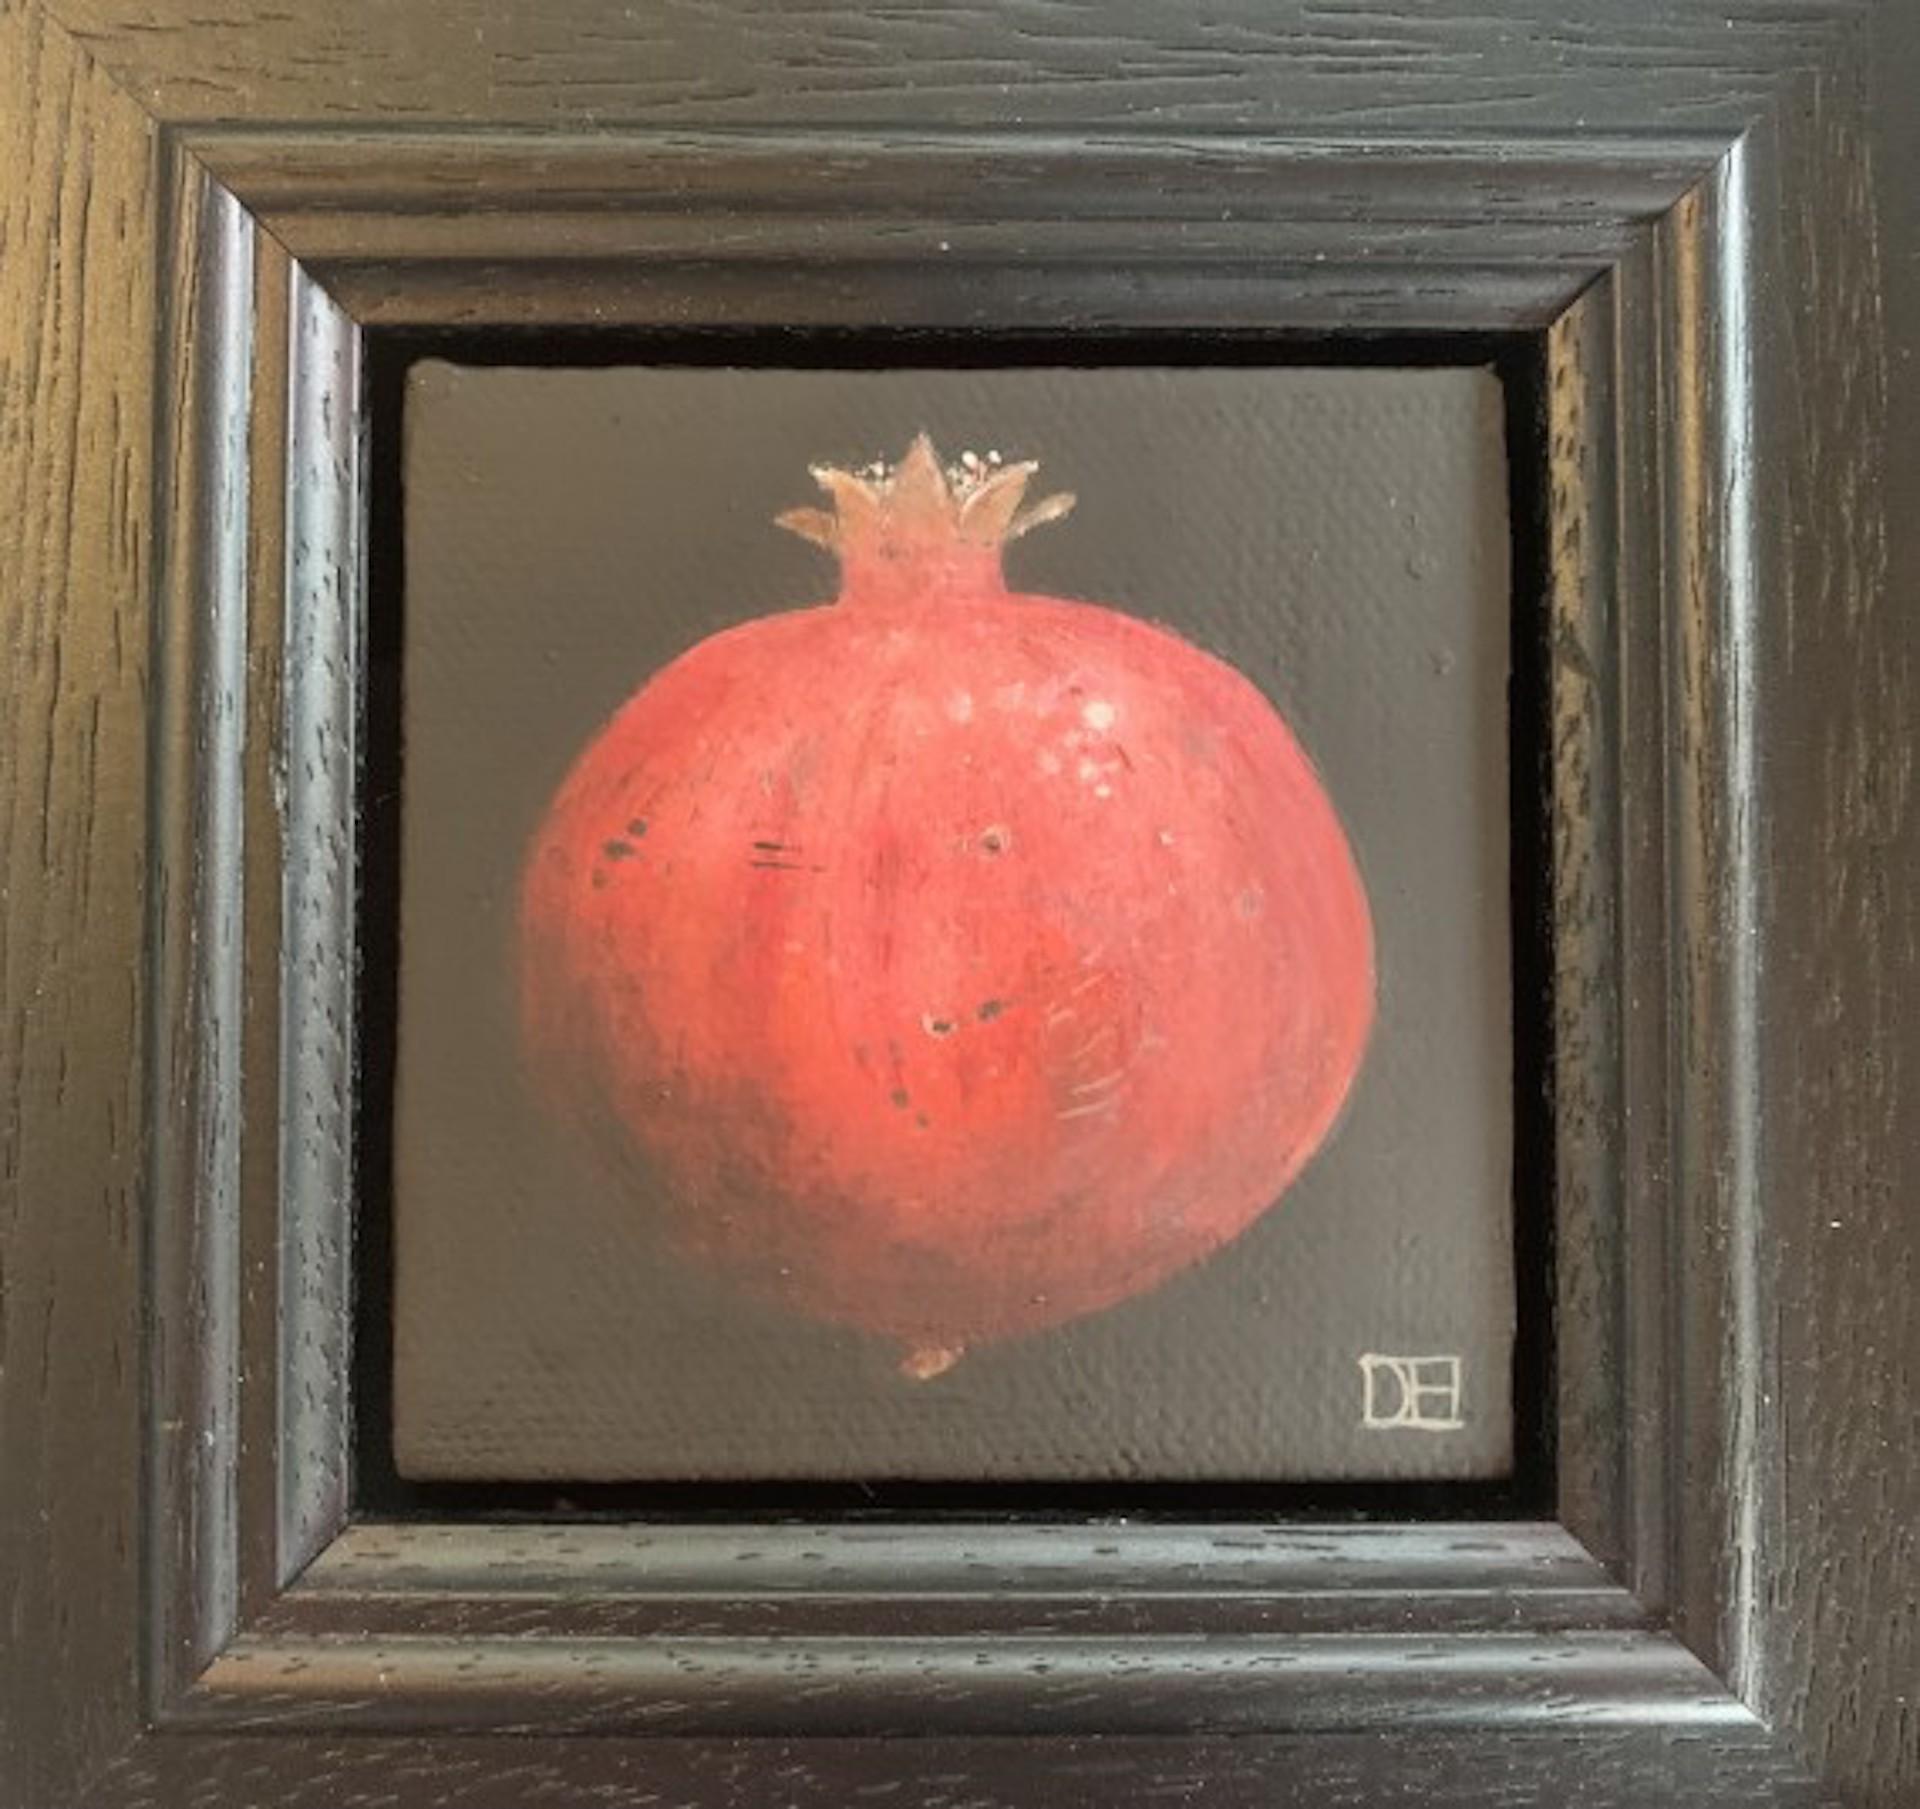 Pocket Red Pomegranate by Dani Humberstone [2021]
original

Oil paint on canvas

Image size: H:7.5 cm x W:7.5 cm

Complete Size of Unframed Work: H:7.5 cm x W:7.5 cm x D:2.5cm

Framed Size: H:18.5 cm x W:18.5 cm x D:3.5cm

Sold Framed

Please note